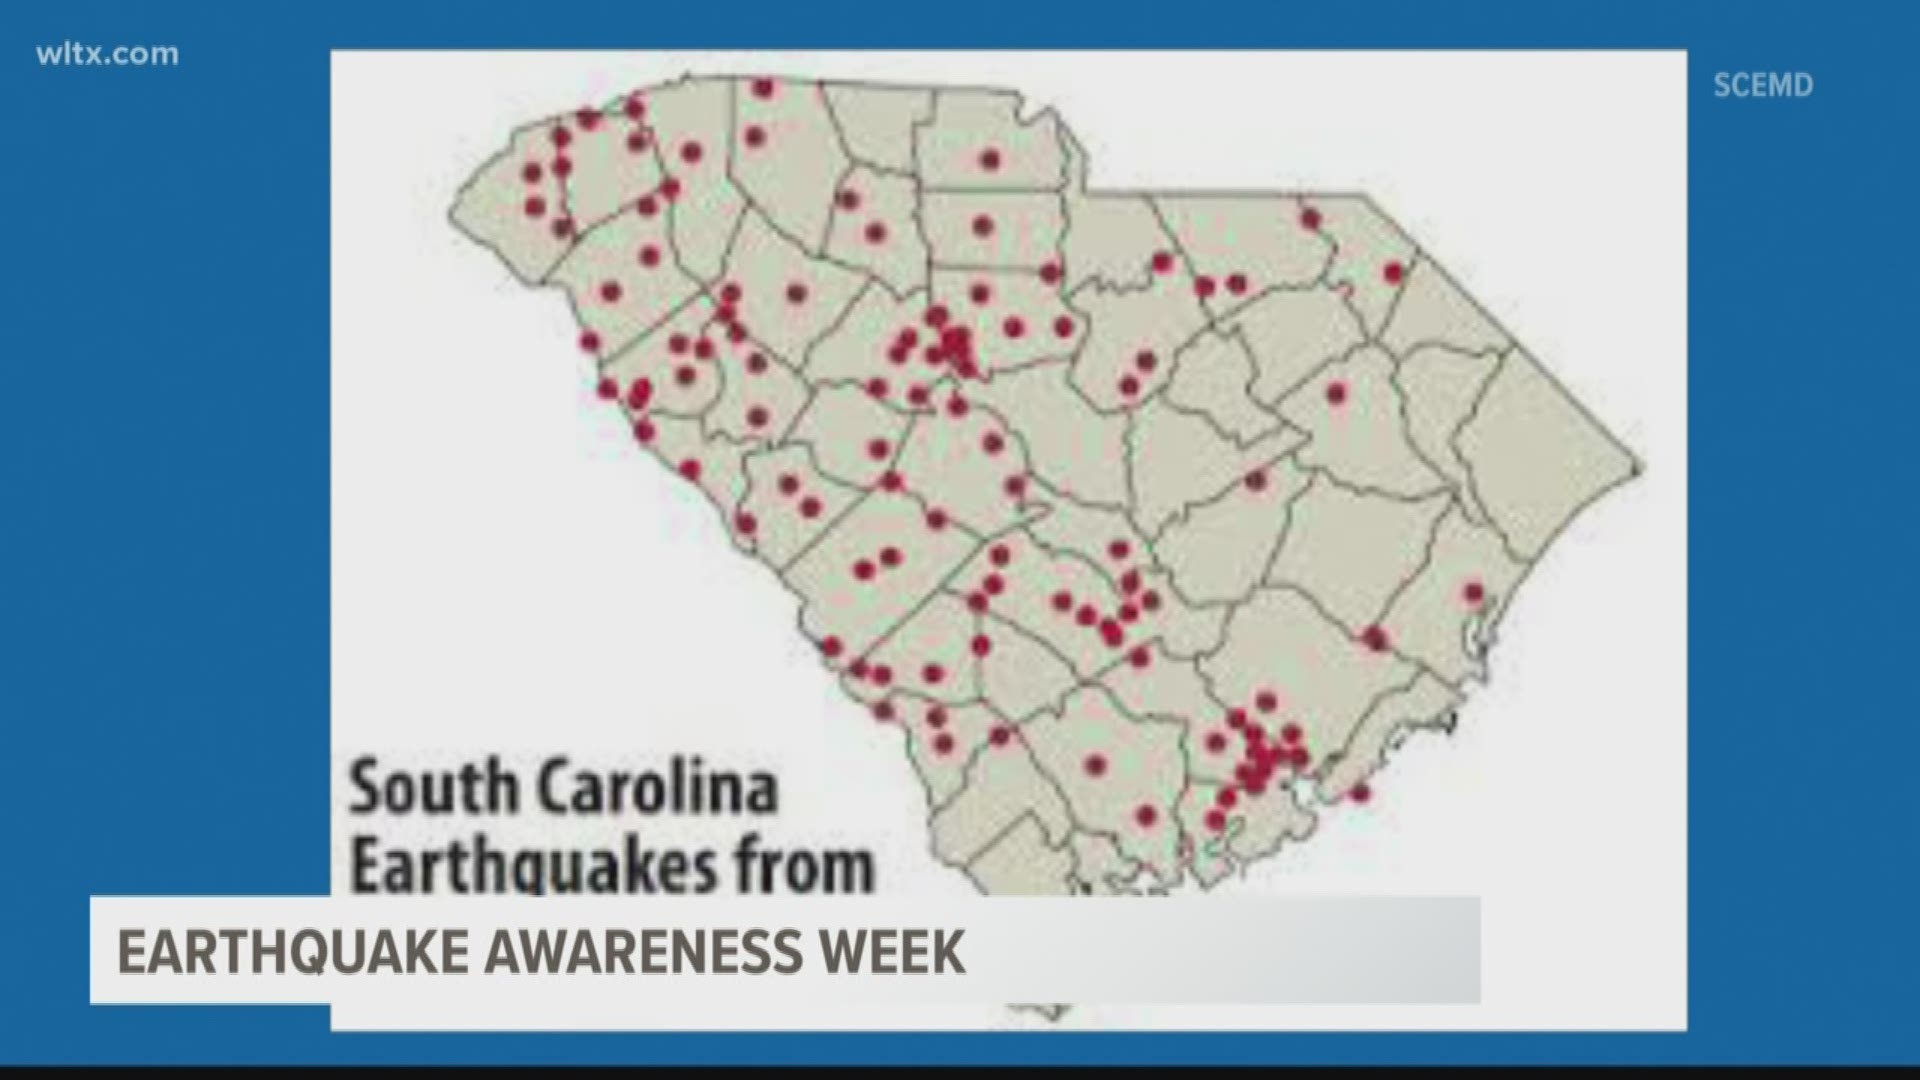 The week of Oct. 13-19 is observed as Earthquake Preparedness Week in South Carolina. A highlight of the week will be the Great Southeast ShakeOut on Oct. 17.